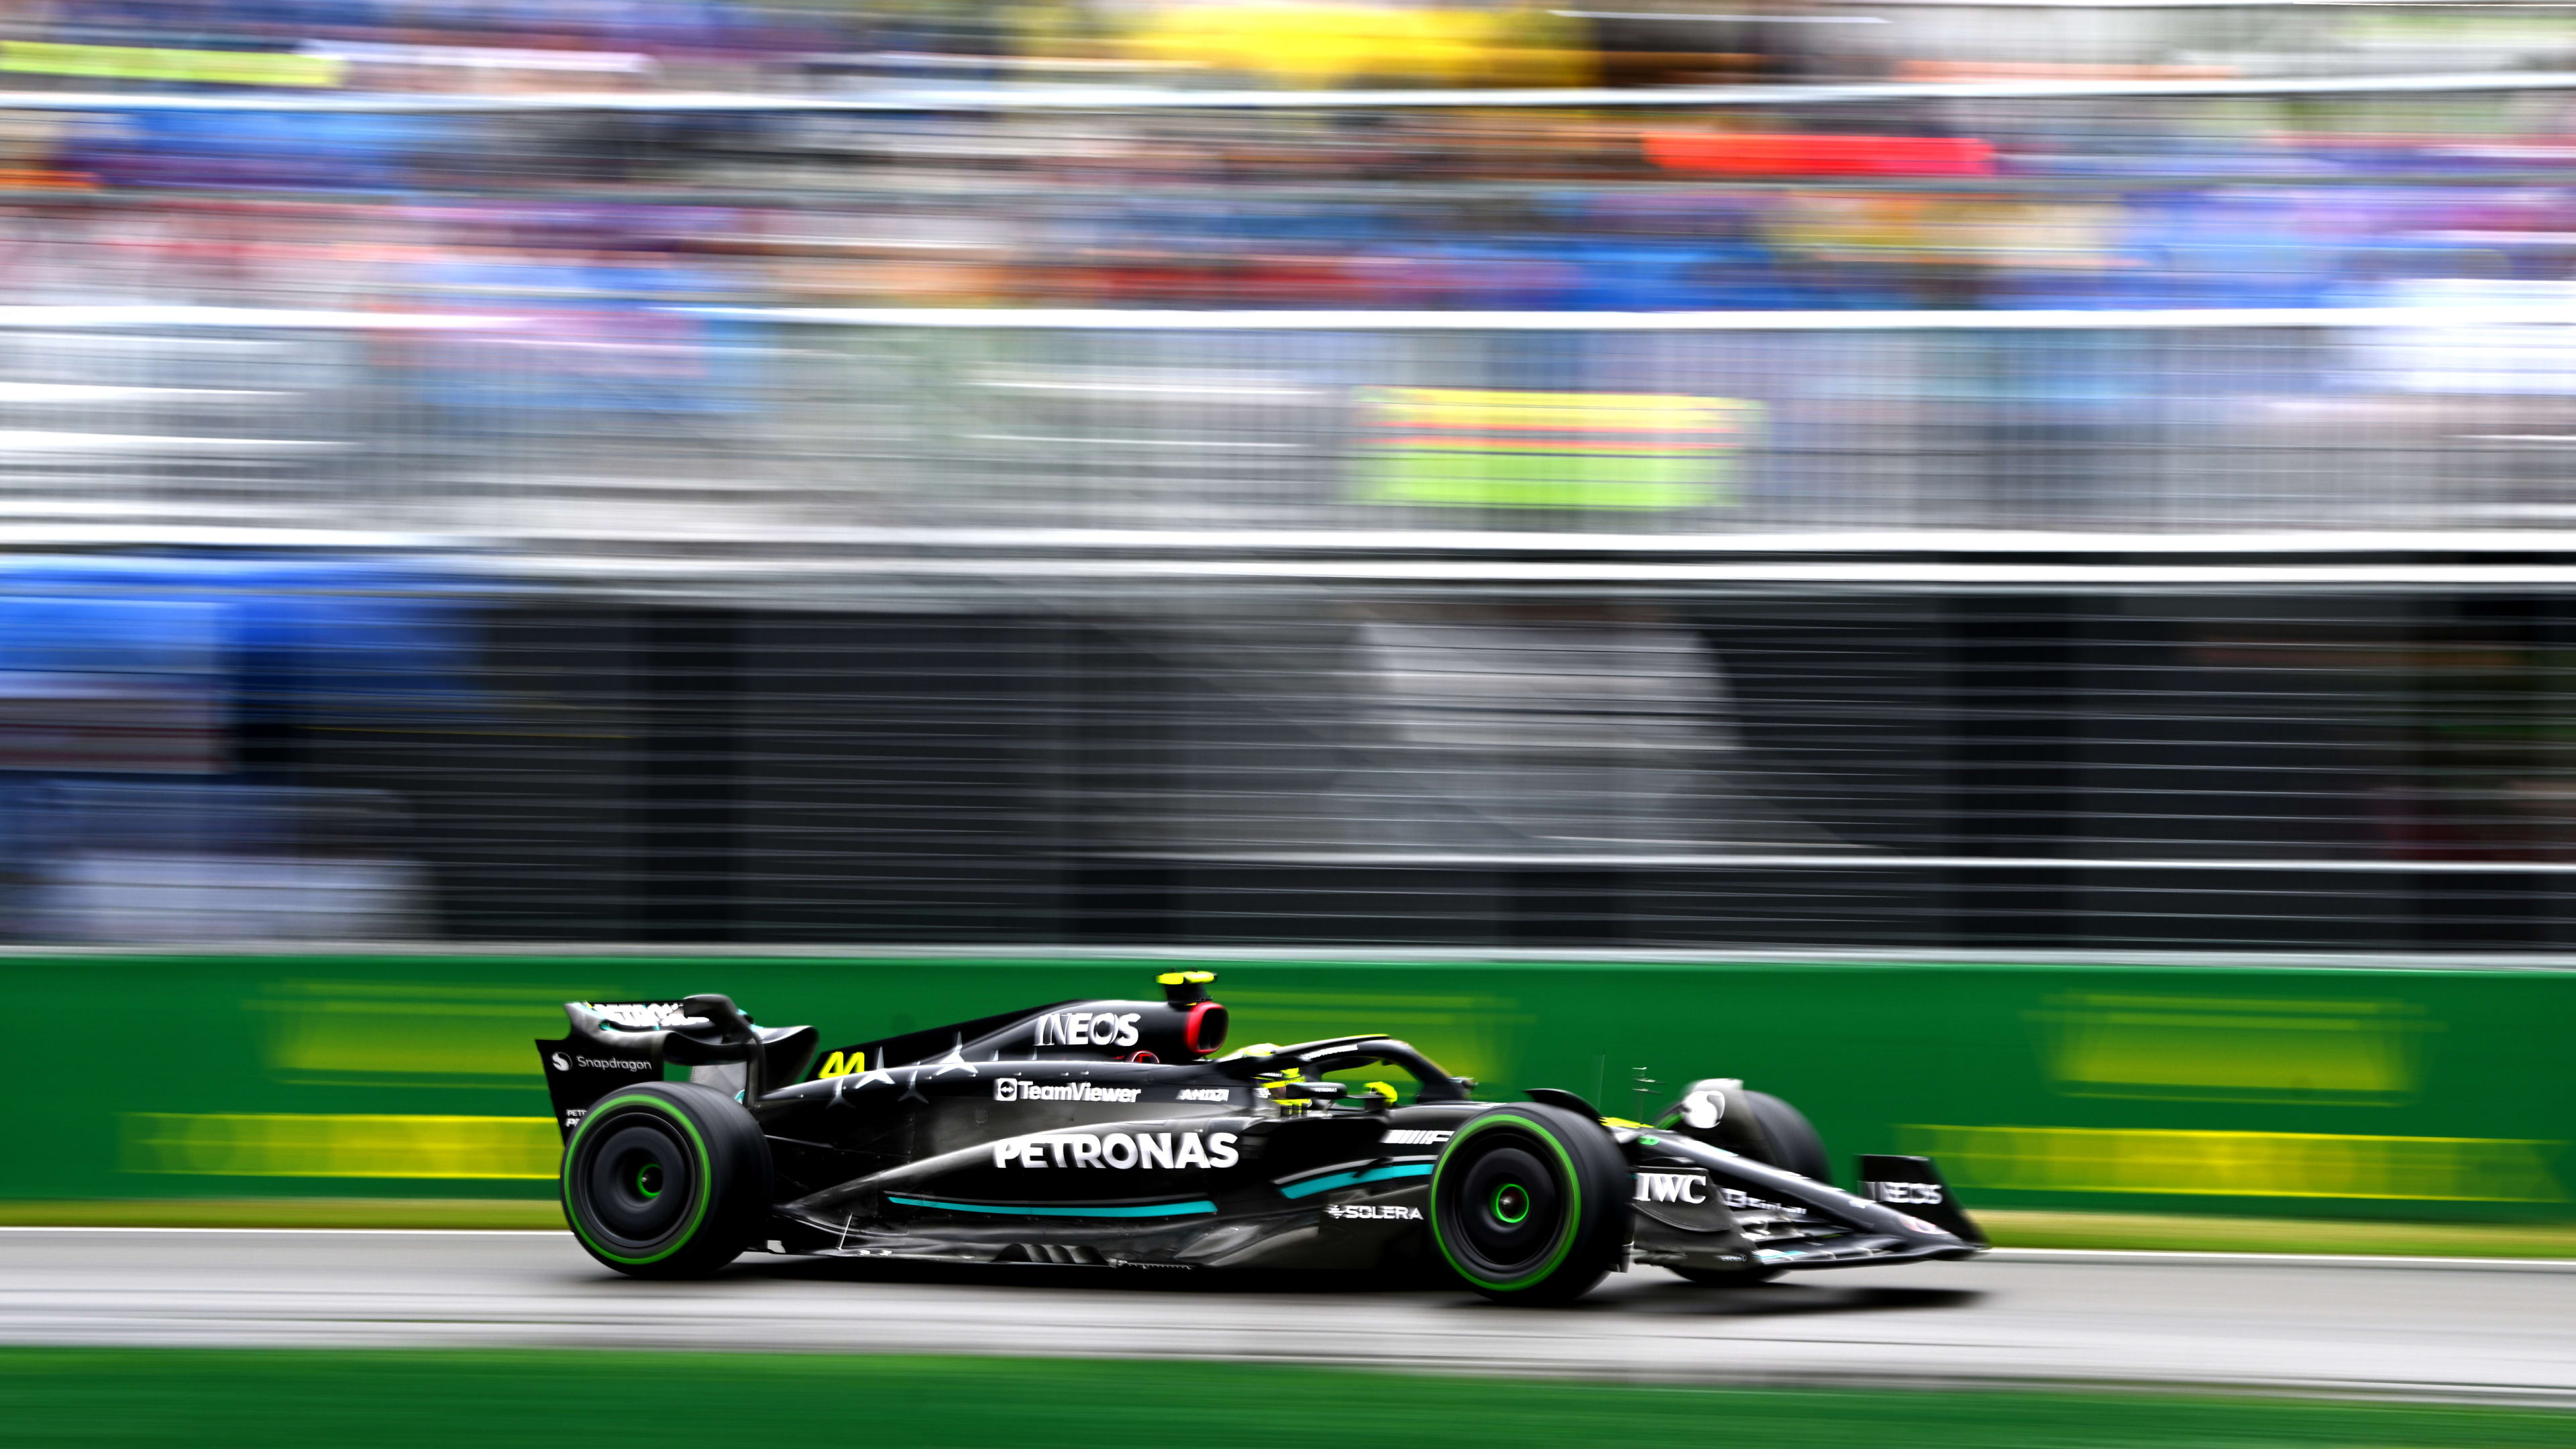 LIVE COVERAGE Follow all the action from qualifying for the Canadian Grand Prix